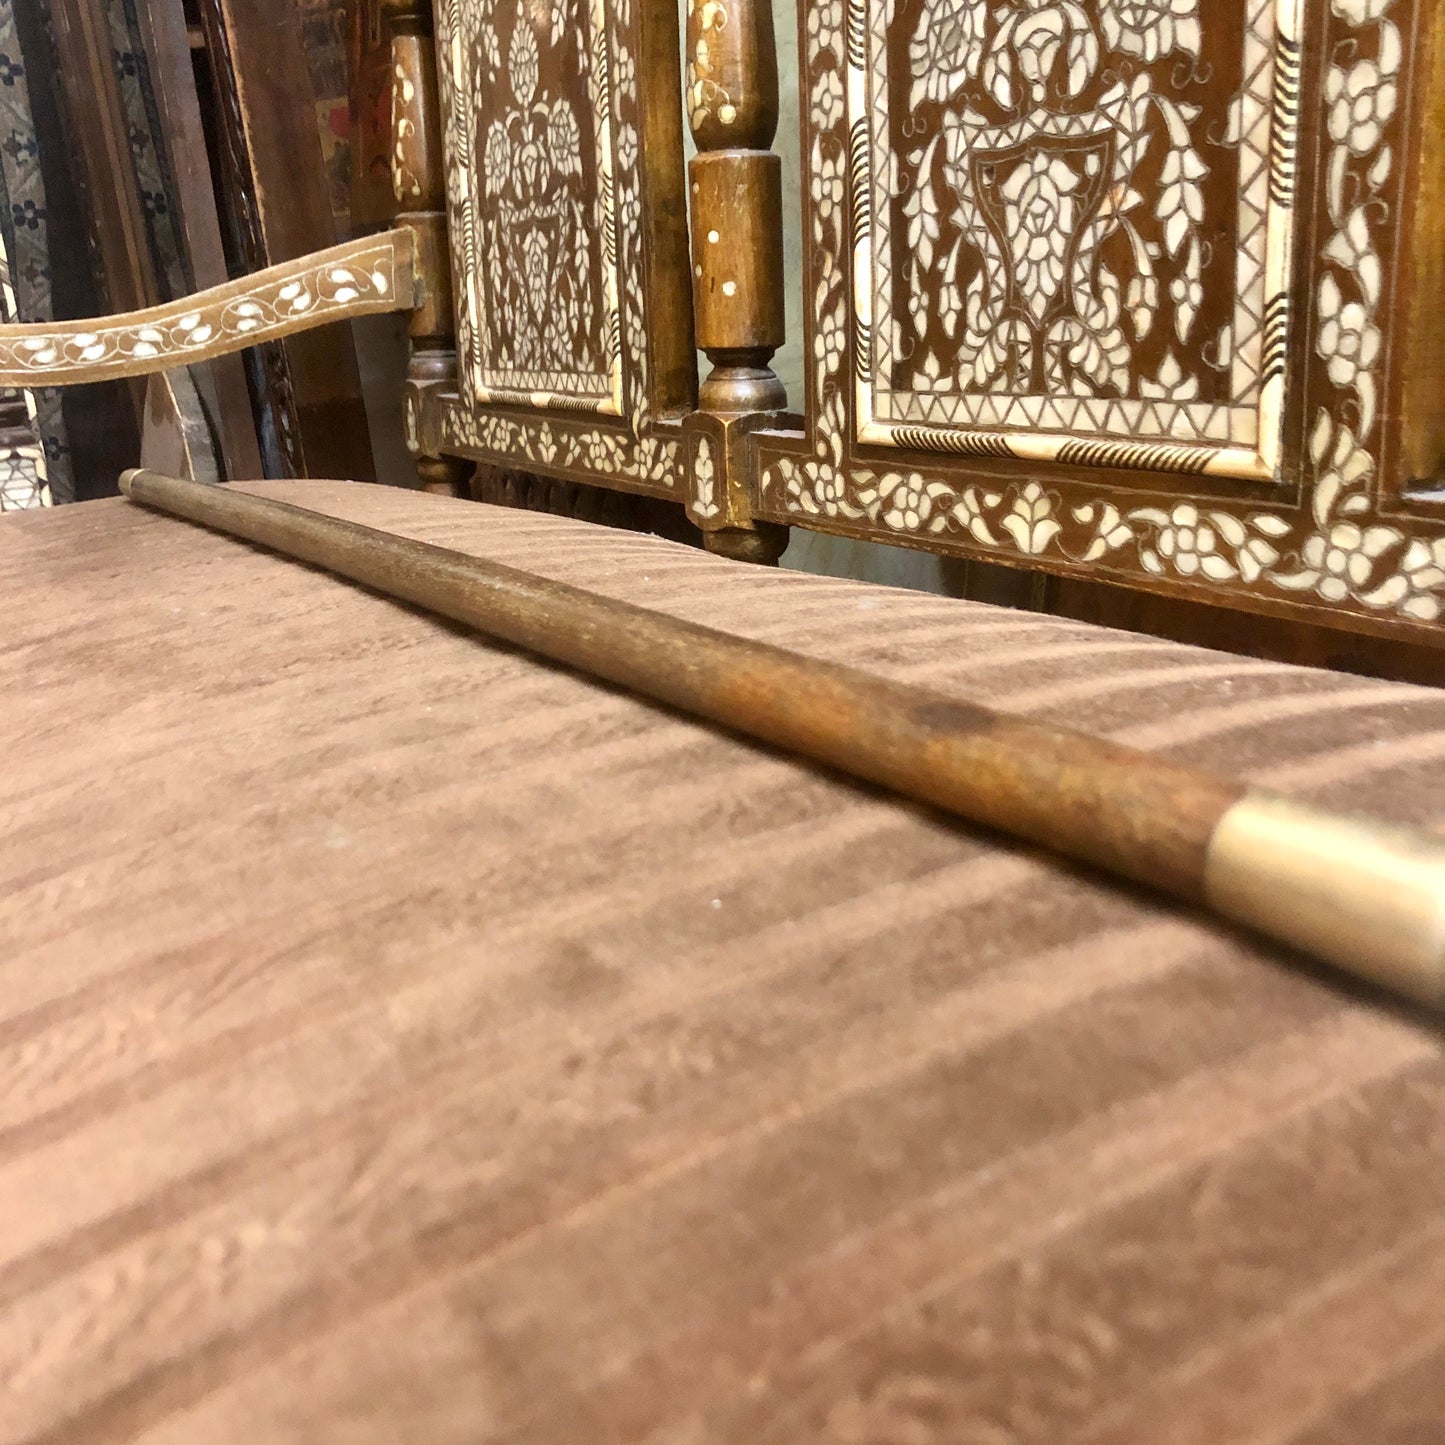 A handmade walking-stick, made out of Pure Ivory.